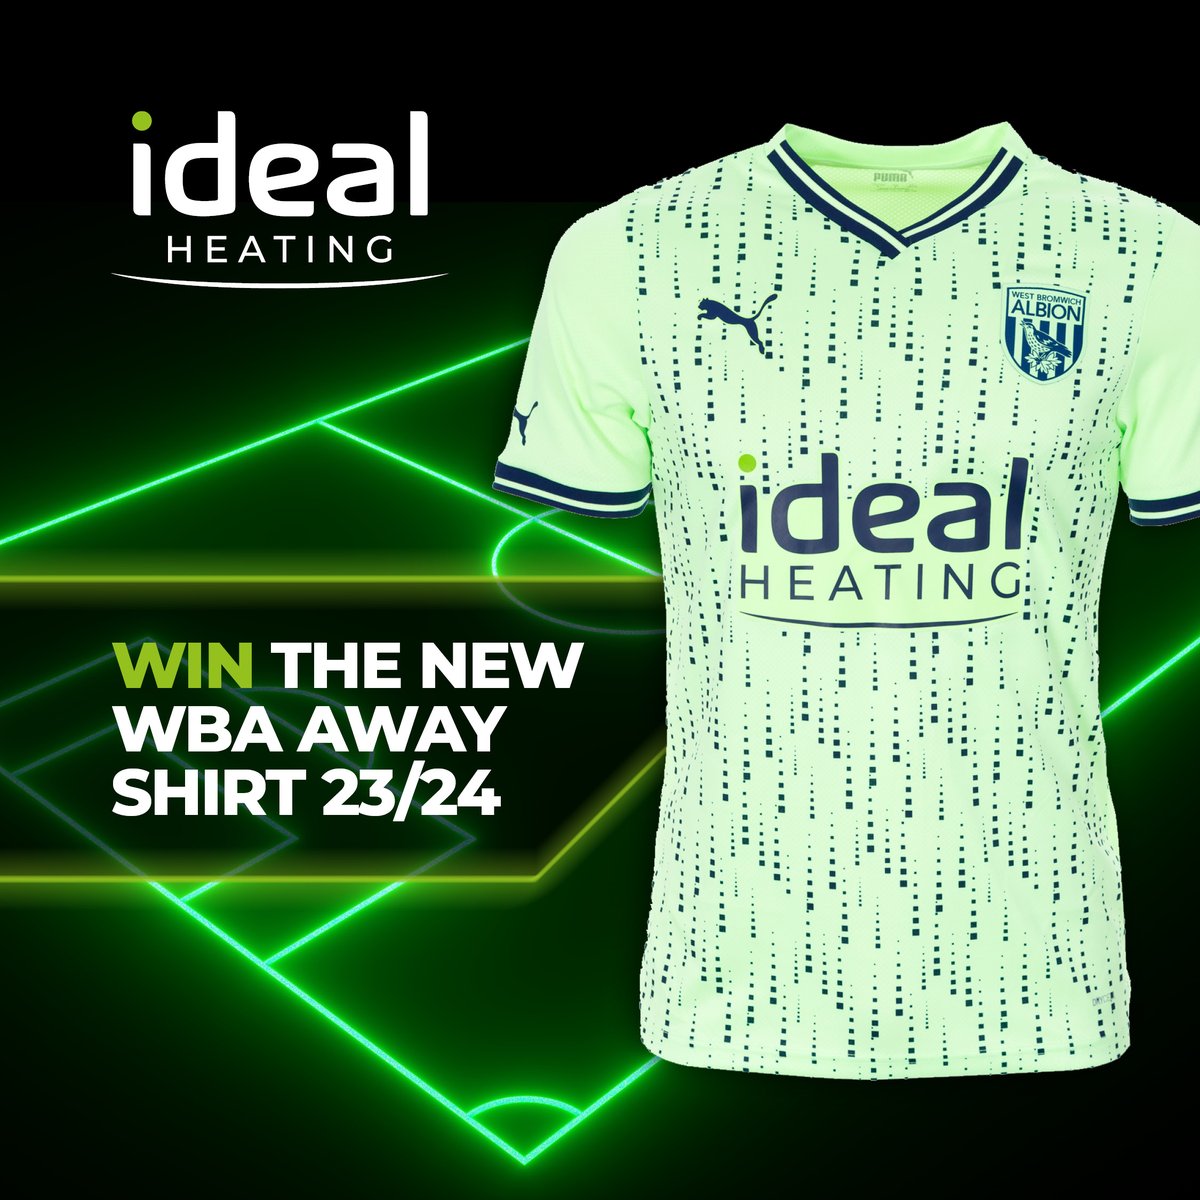 ⚽ WIN THE NEW GREEN & BLUE WEST BROMWICH ALBION 23/24 AWAY SHIRT ⚽ All you need to do is follow these three steps for a chance to win: ⚽ Like this post ⚽ Share this post ⚽ Follow our page (Competition winners will be announced Monday 7th Aug 2023) #IdealHeating #COYB #WBA